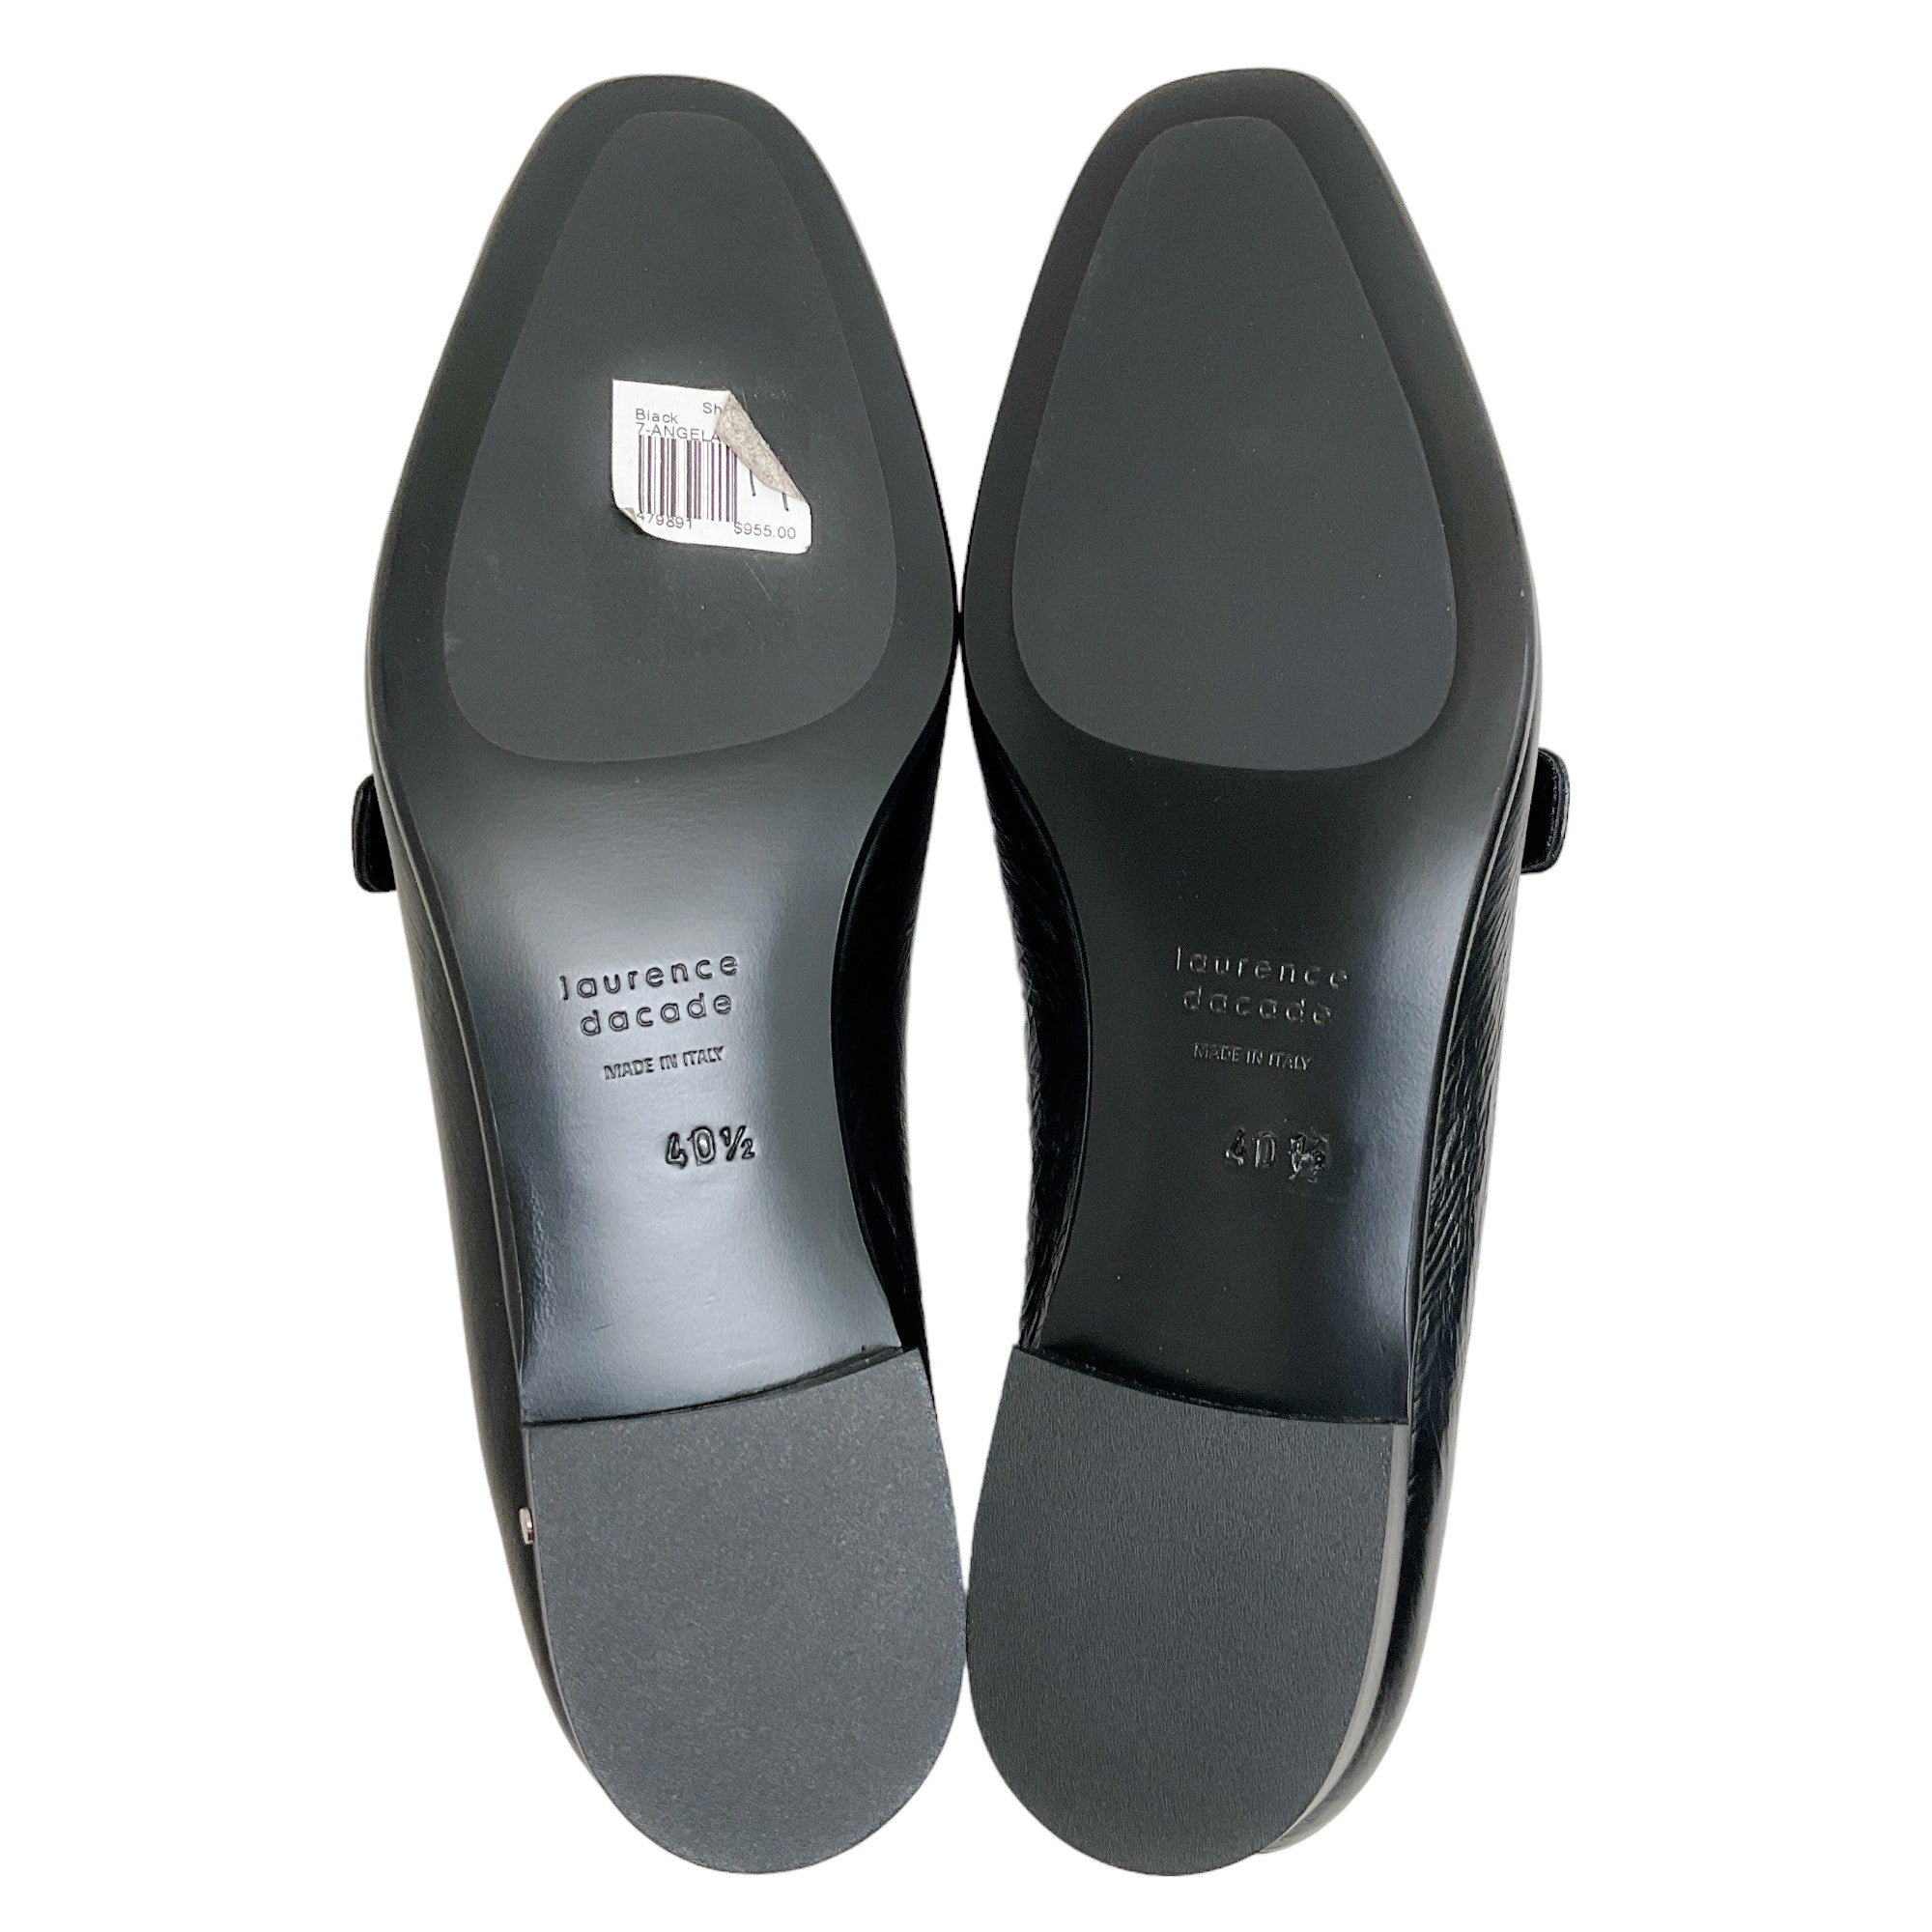 Laurence Dacade Black Leather Angie Loafers